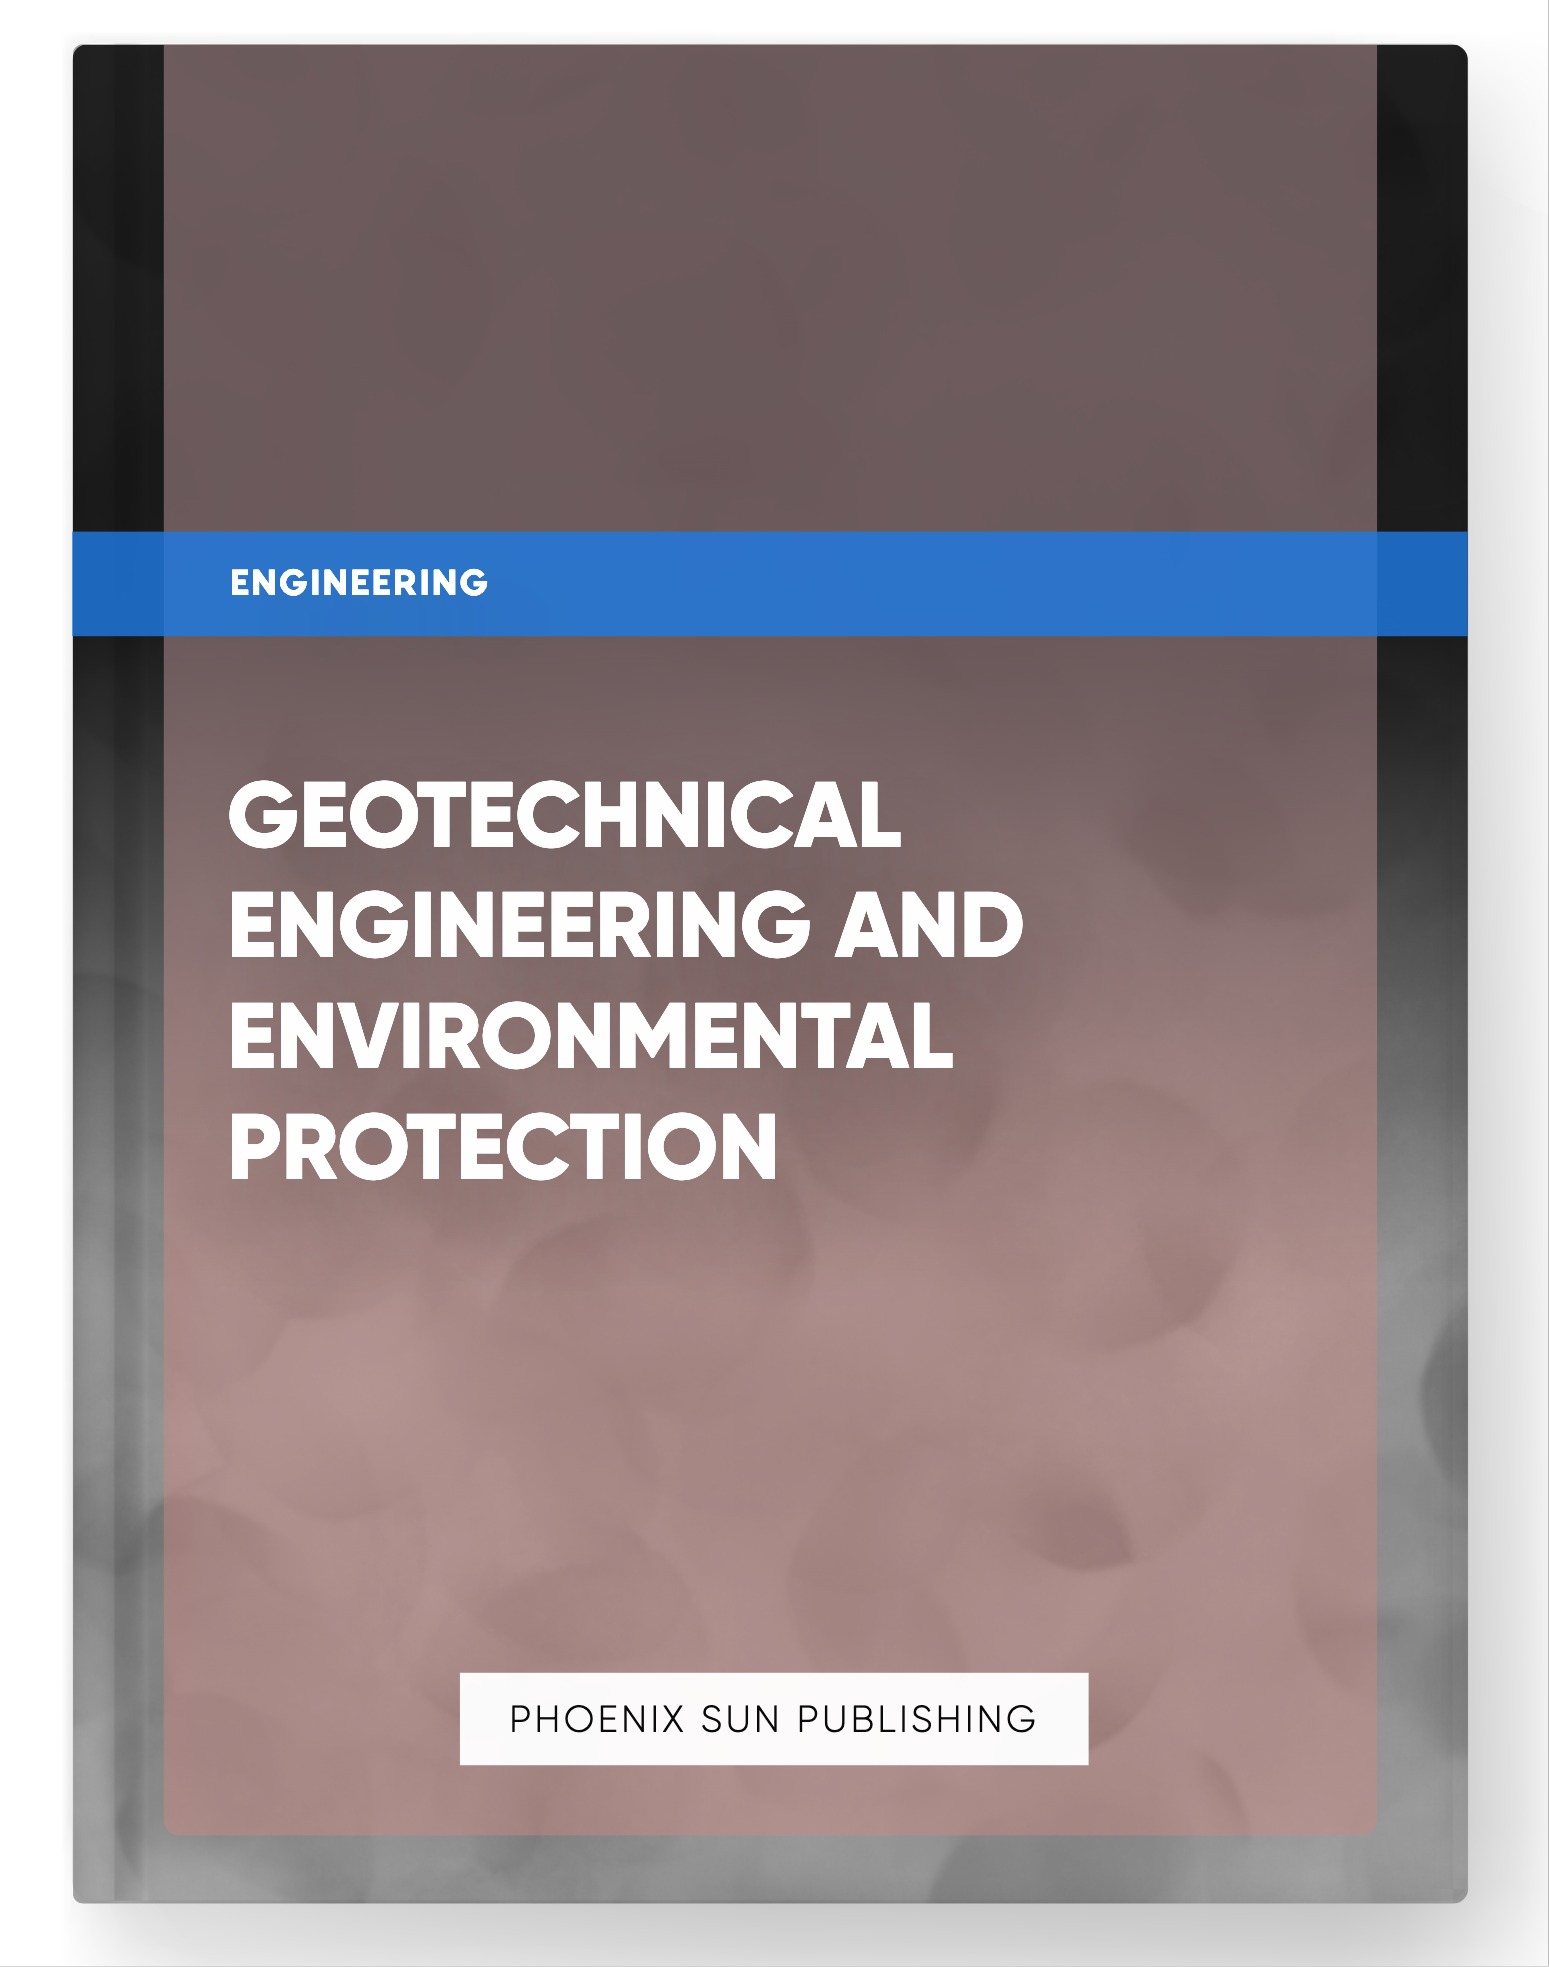 Geotechnical Engineering and Environmental Protection